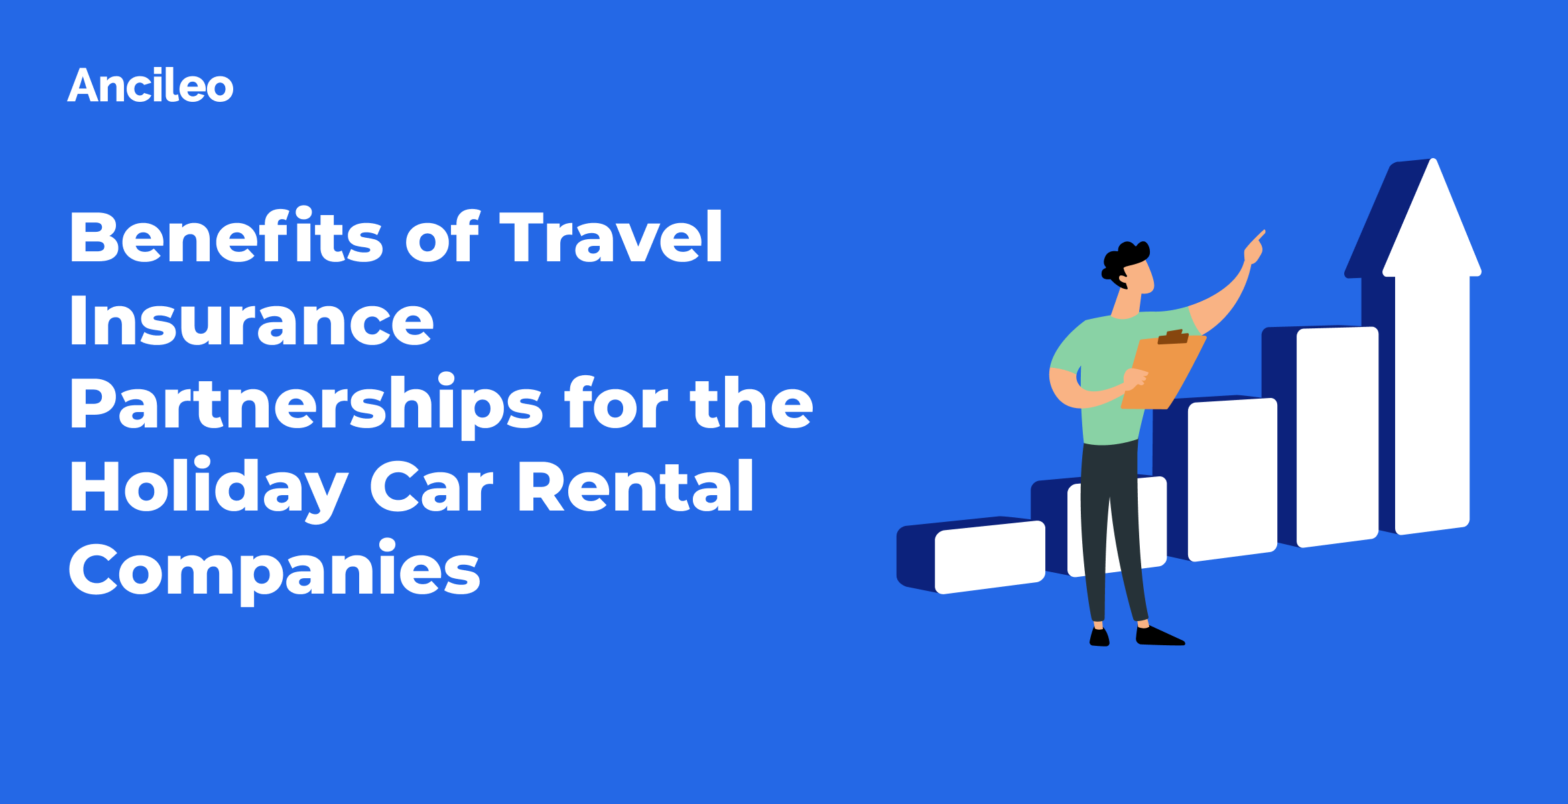 Benefits of Travel Insurance Partnerships for the Holiday Car Rental Companies